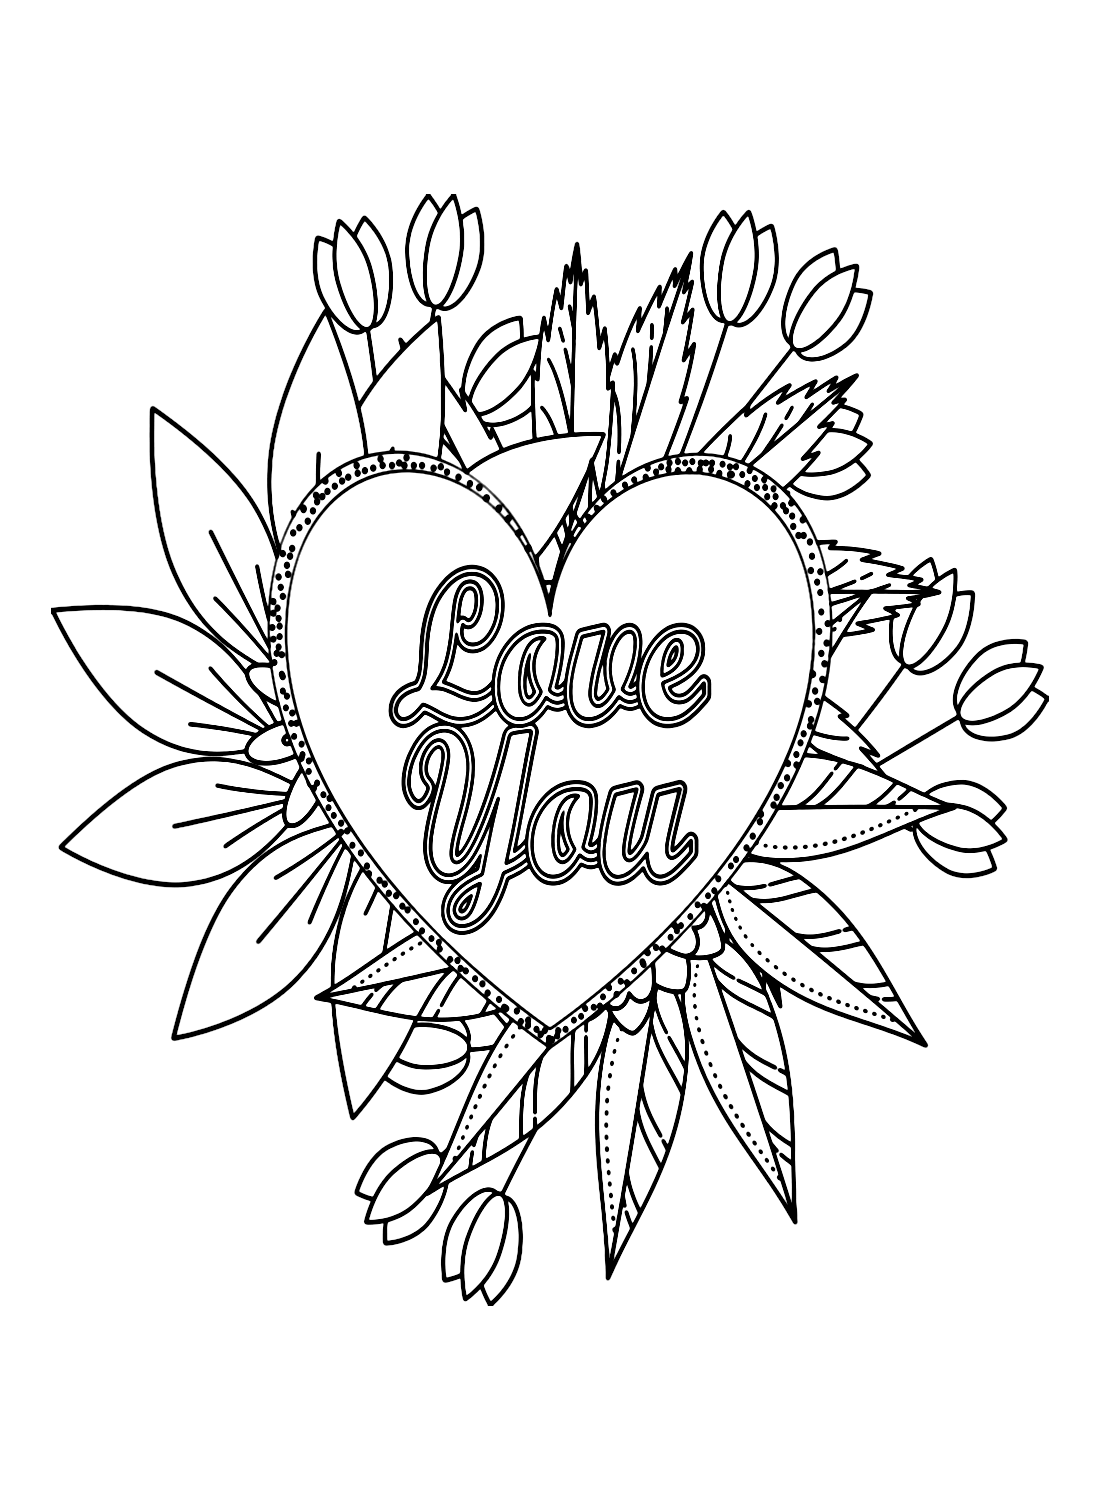 Love You with Flowers Heart Coloring Page - Free Printable Coloring Pages